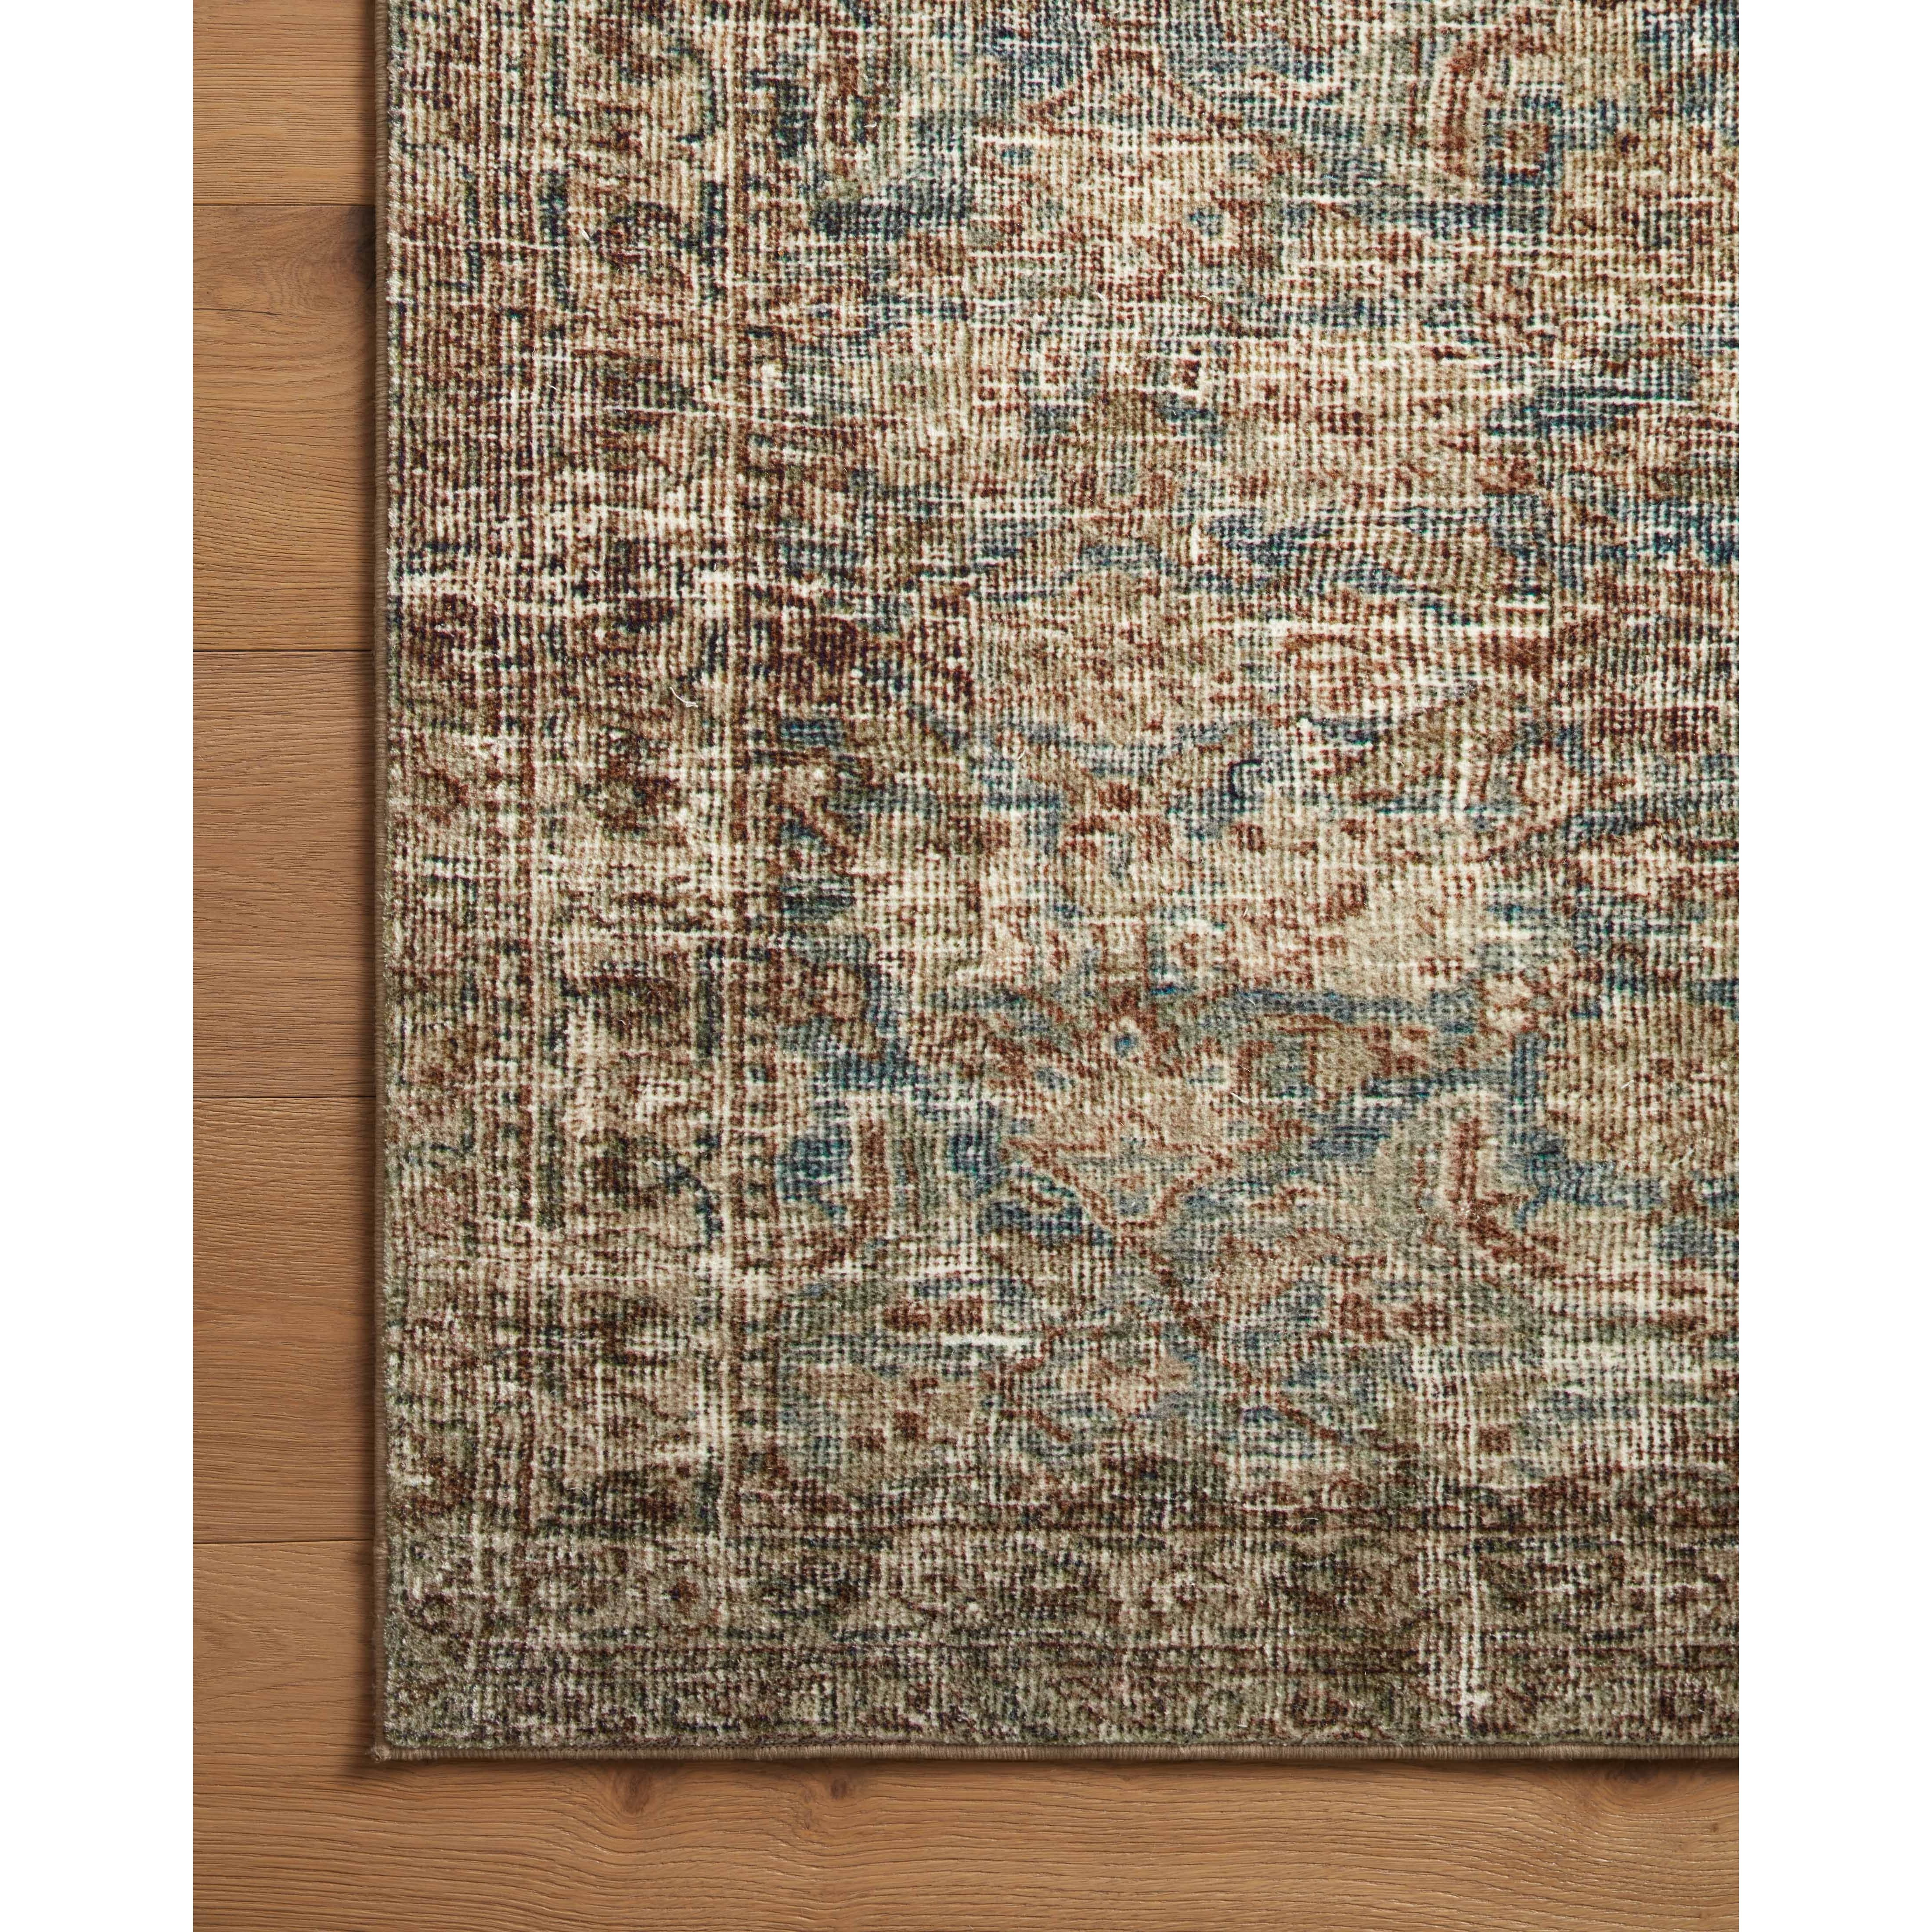 With the faded feel of an antique rug, the Amber Lewis x Loloi Morgan Sea / Sage Rug is a feat of modern printed construction. These impressive area rugs expertly blend sophisticated tones to recreate the dynamic colors of a vintage textiles. Power-loomed of CloudPile™ construction, these rugs are extra-soft to walk upon yet still durable for high-traffic rooms. Amethyst Home provides interior design services, furniture, rugs, and lighting in the Des Moines metro area.